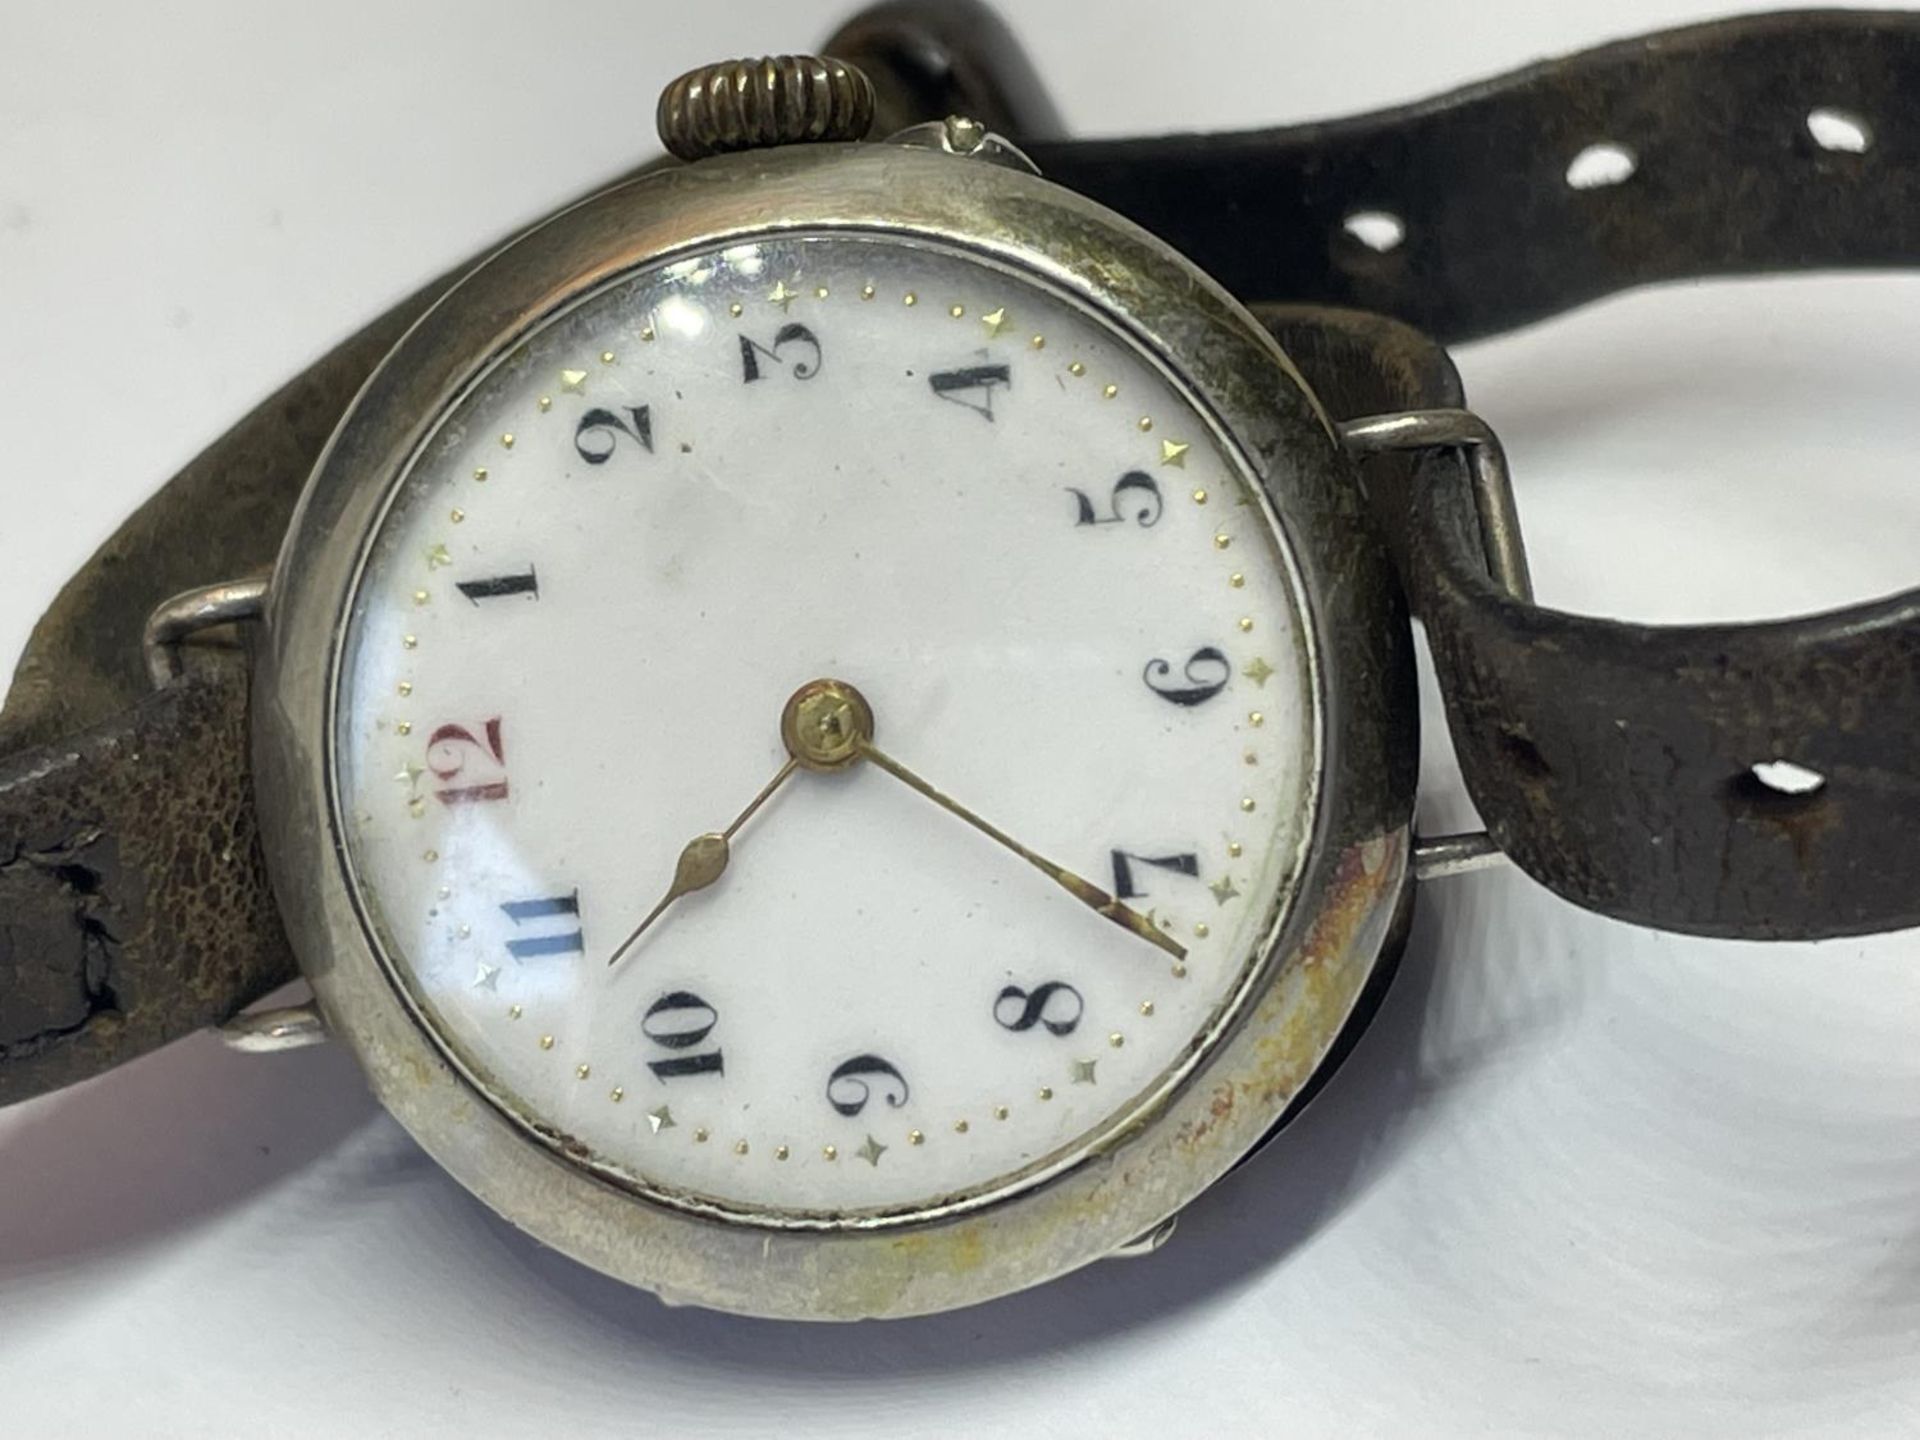 A MARKED 925 VINTAGE WRIST WATCH WITH A LEATHER STRAP IN A PRESENTATION BOX - Image 2 of 5